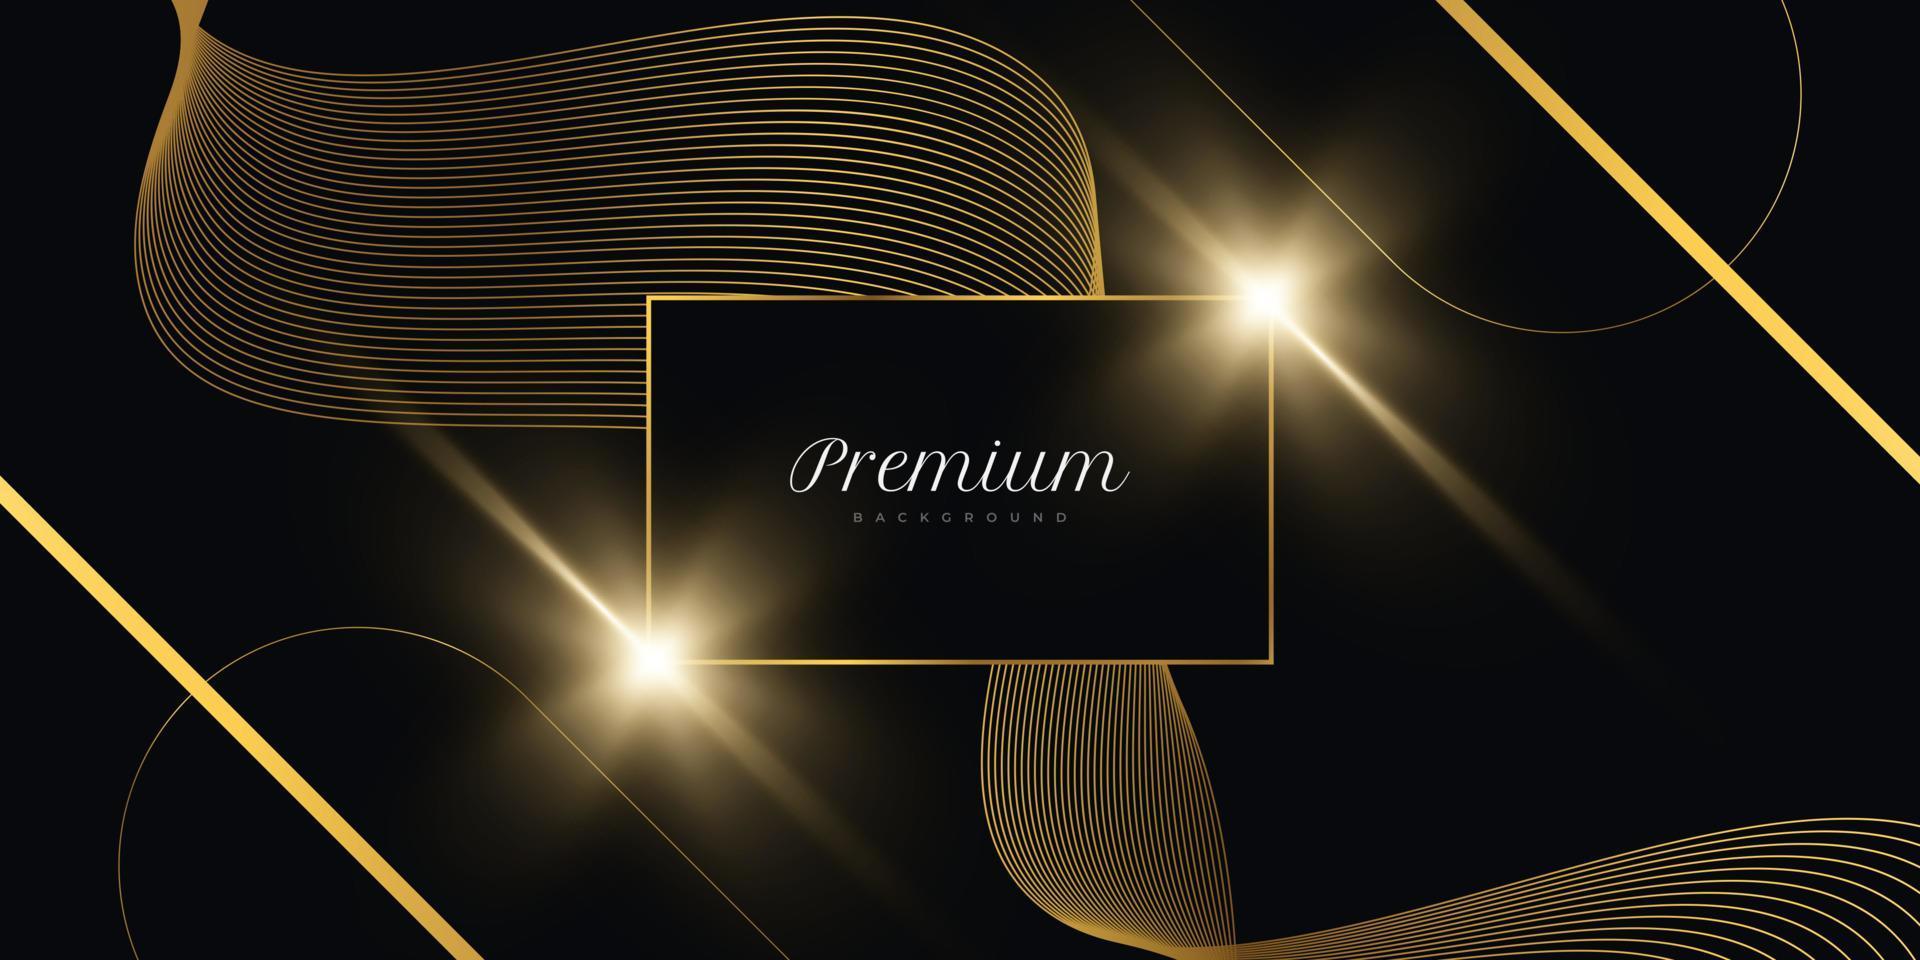 Luxury Black and Gold Background with Wavy Gold Lines and Light Effect. Premium Black and Gold Background for Award, Nomination, Ceremony, Formal Invitation or Certificate Design vector